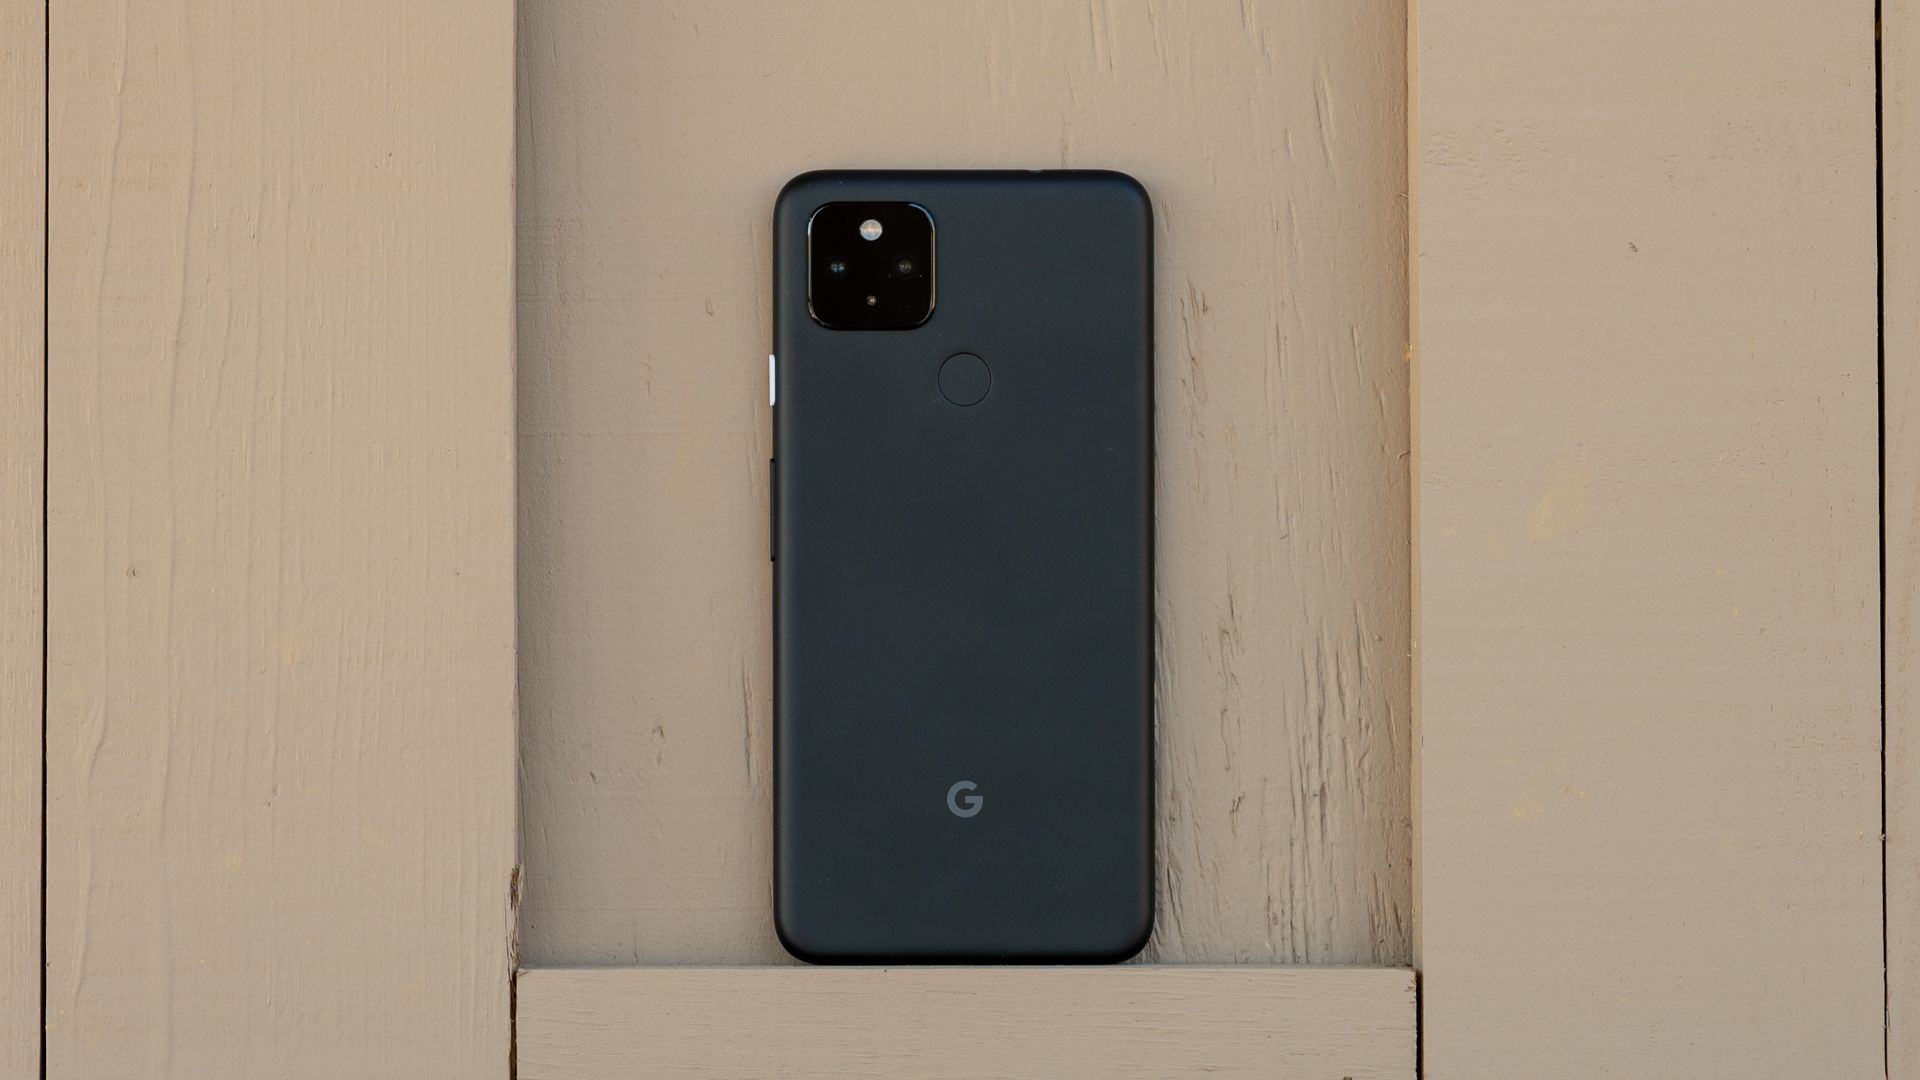 Pixel 4a 5G from the rear